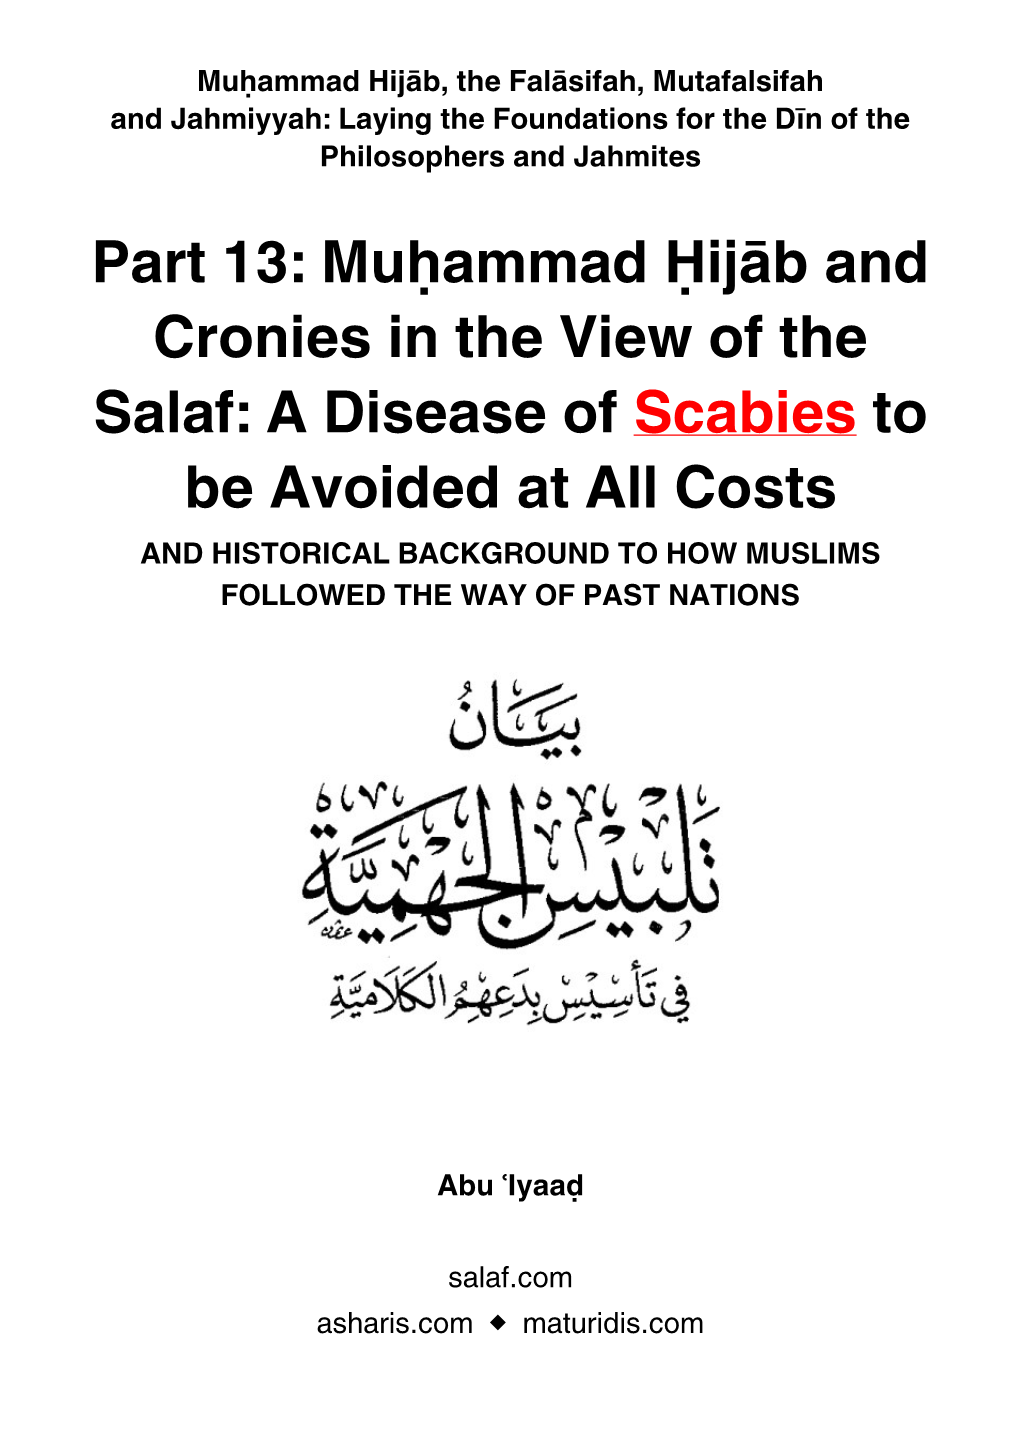 Part 13: Muḥammad Ḥijāb and Cronies in the View of the Salaf